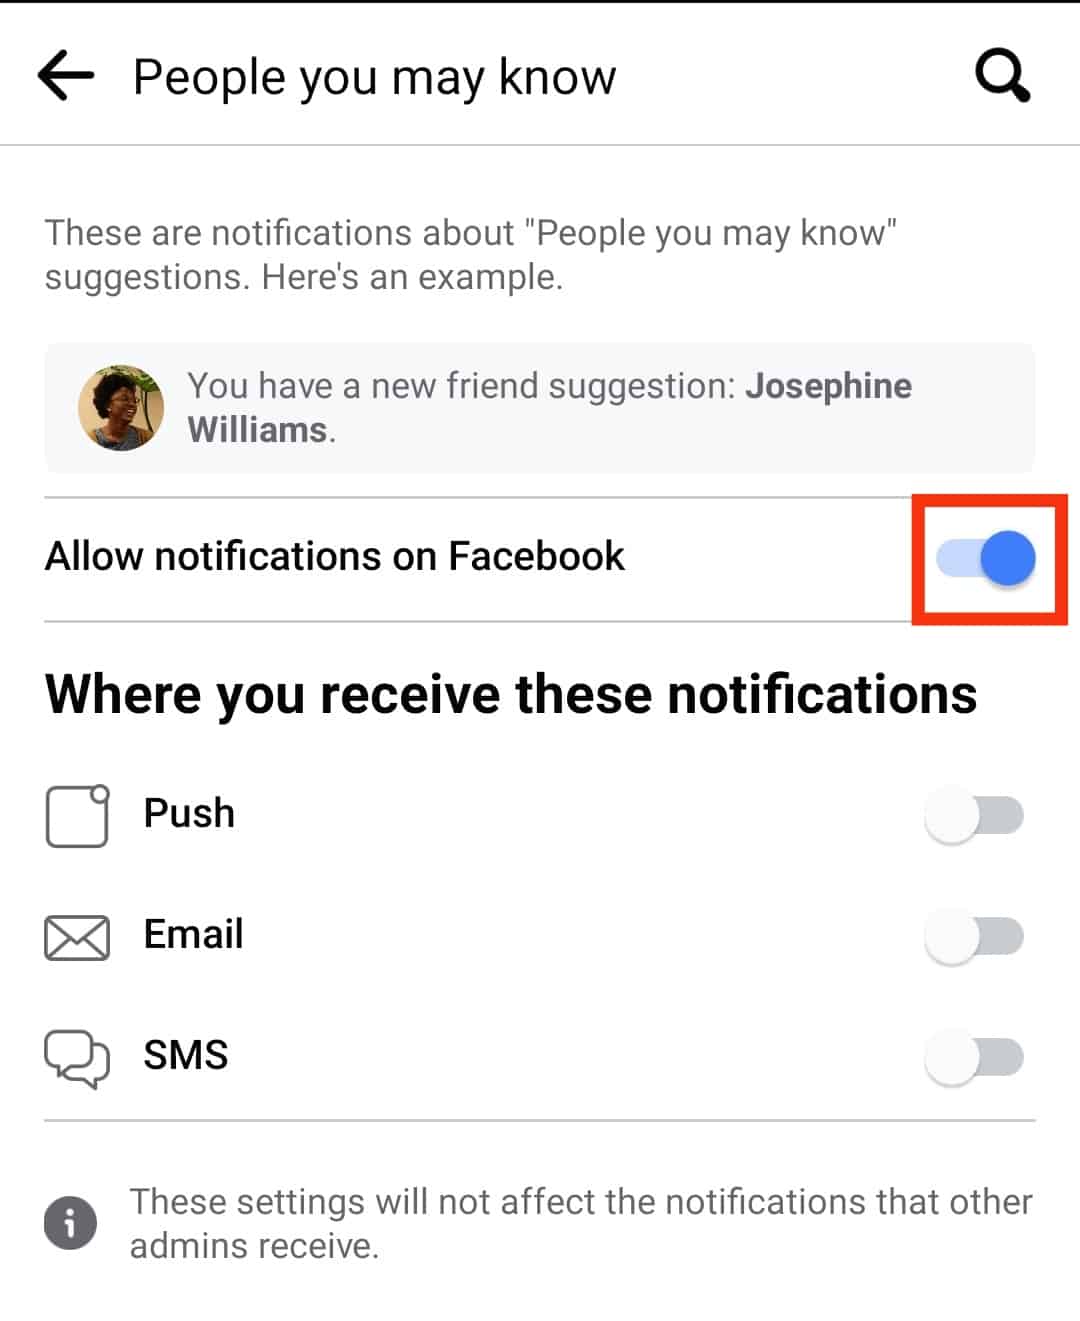 Also Turn Of The Allow Notifications On Facebook Toggle